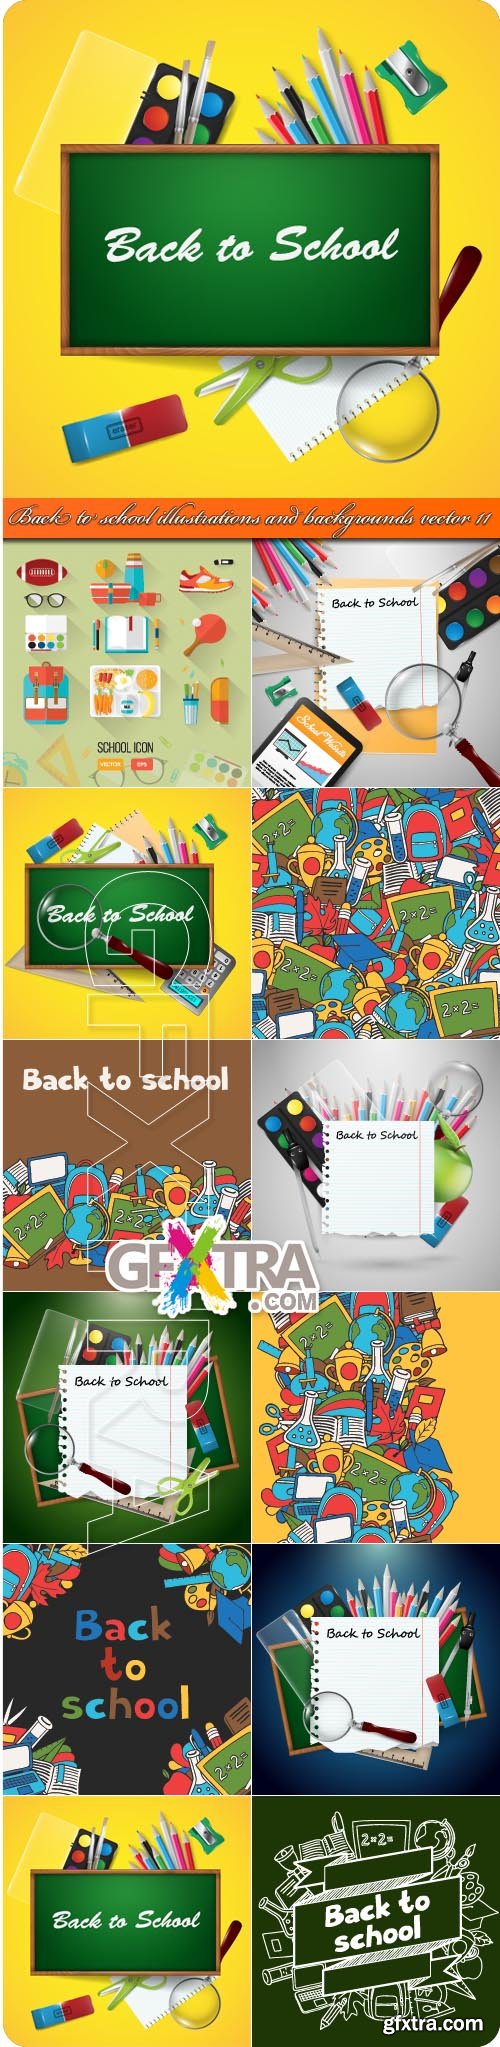 Back to school illustrations and backgrounds vector 11